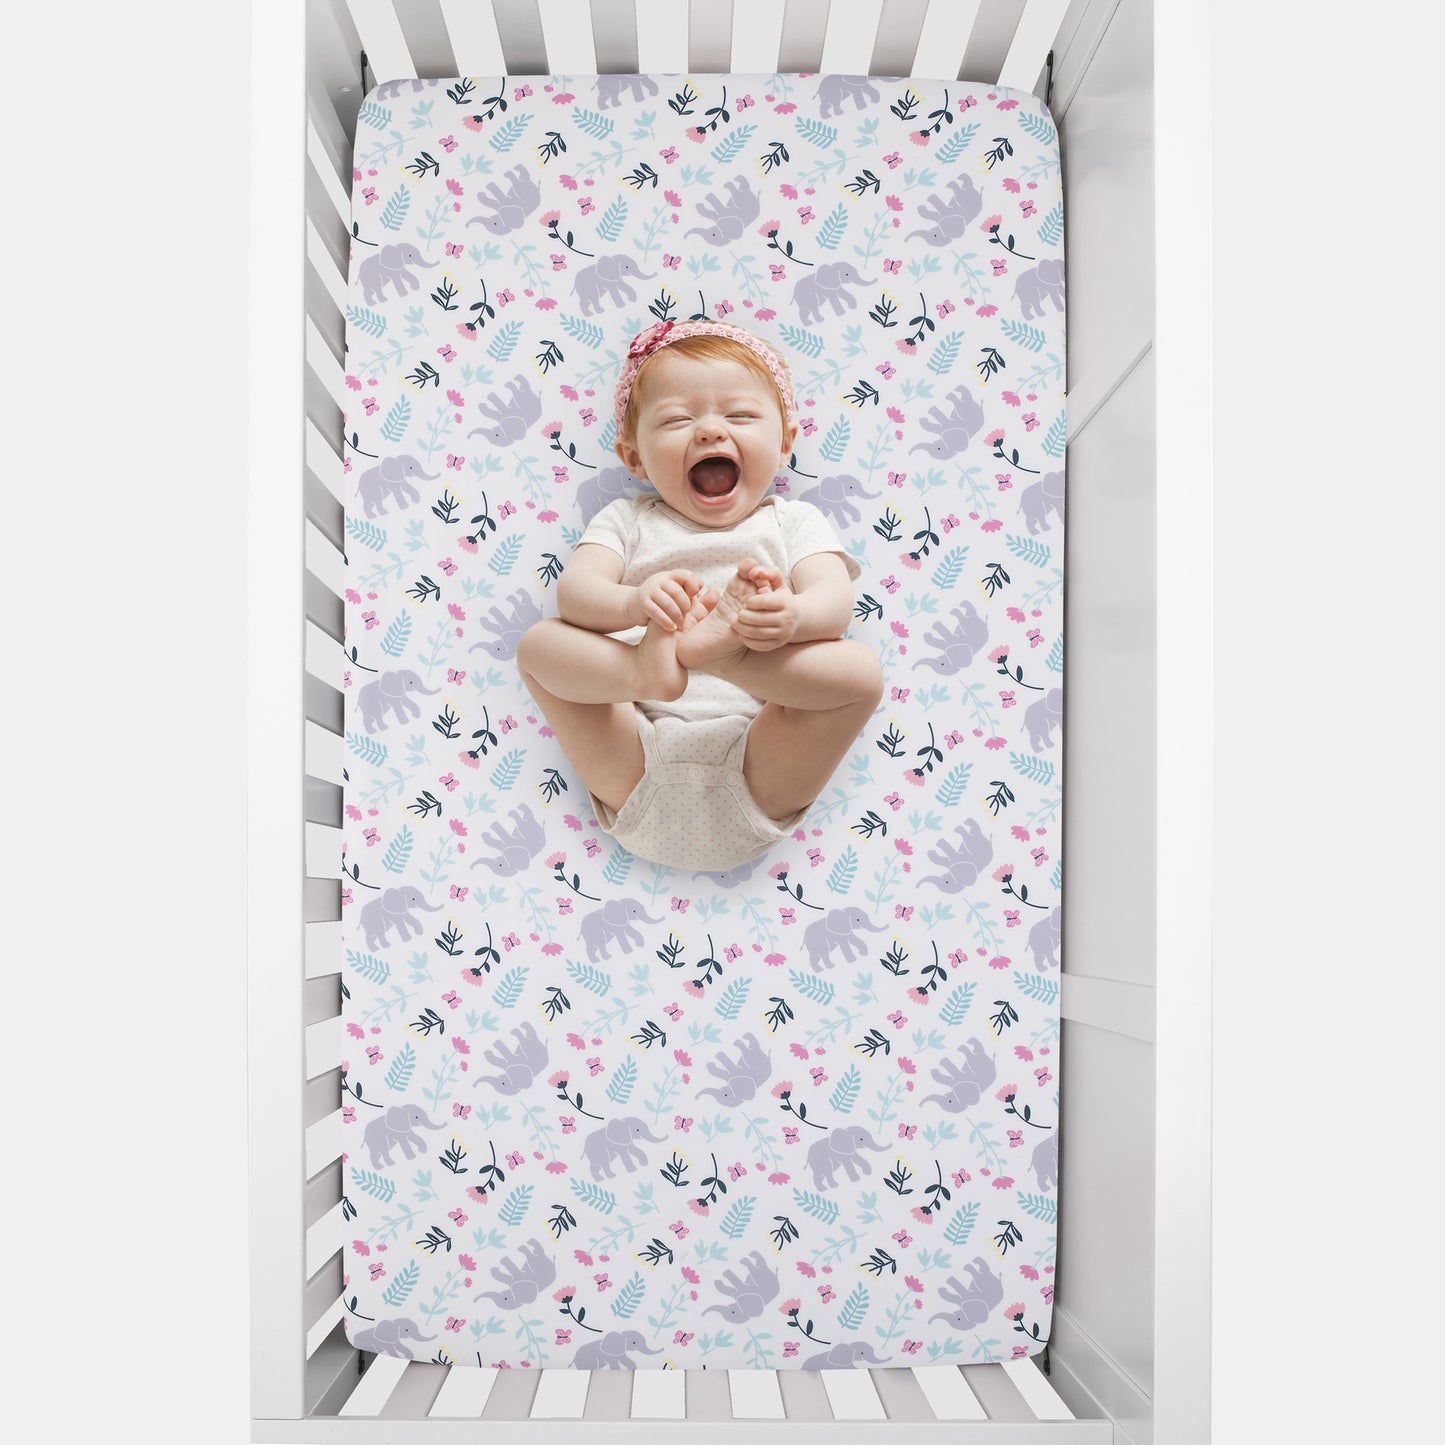 Carter's Floral Elephant White Multi Colored Super Soft Fitted Crib Sheet